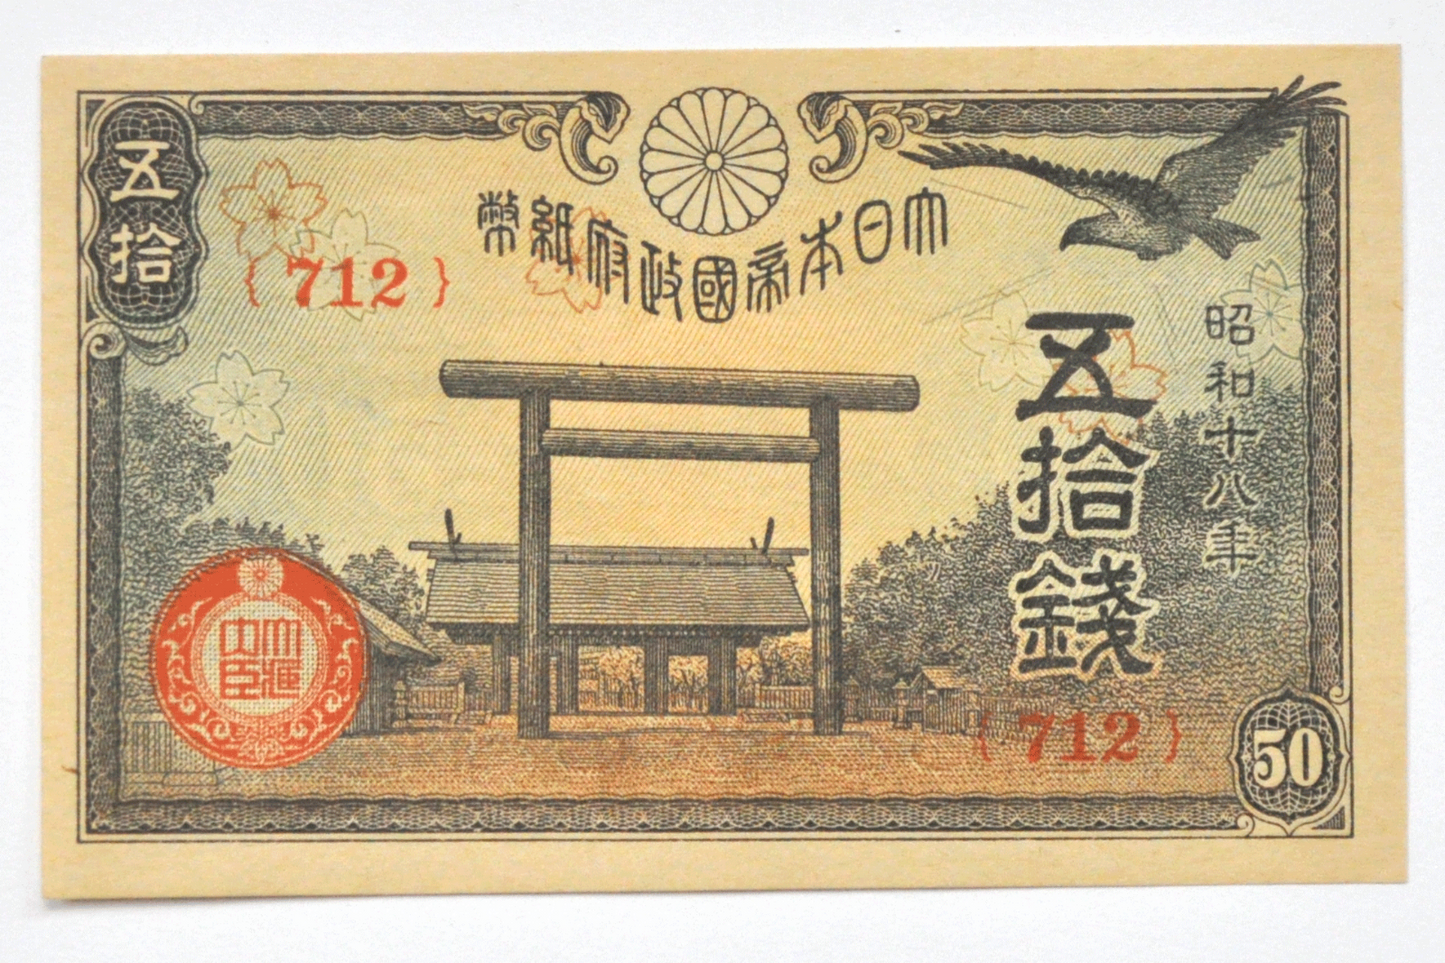 1943 Yr 18 Great Imperial Japanese Government Japan 50 Sen Uncirculated Note 712